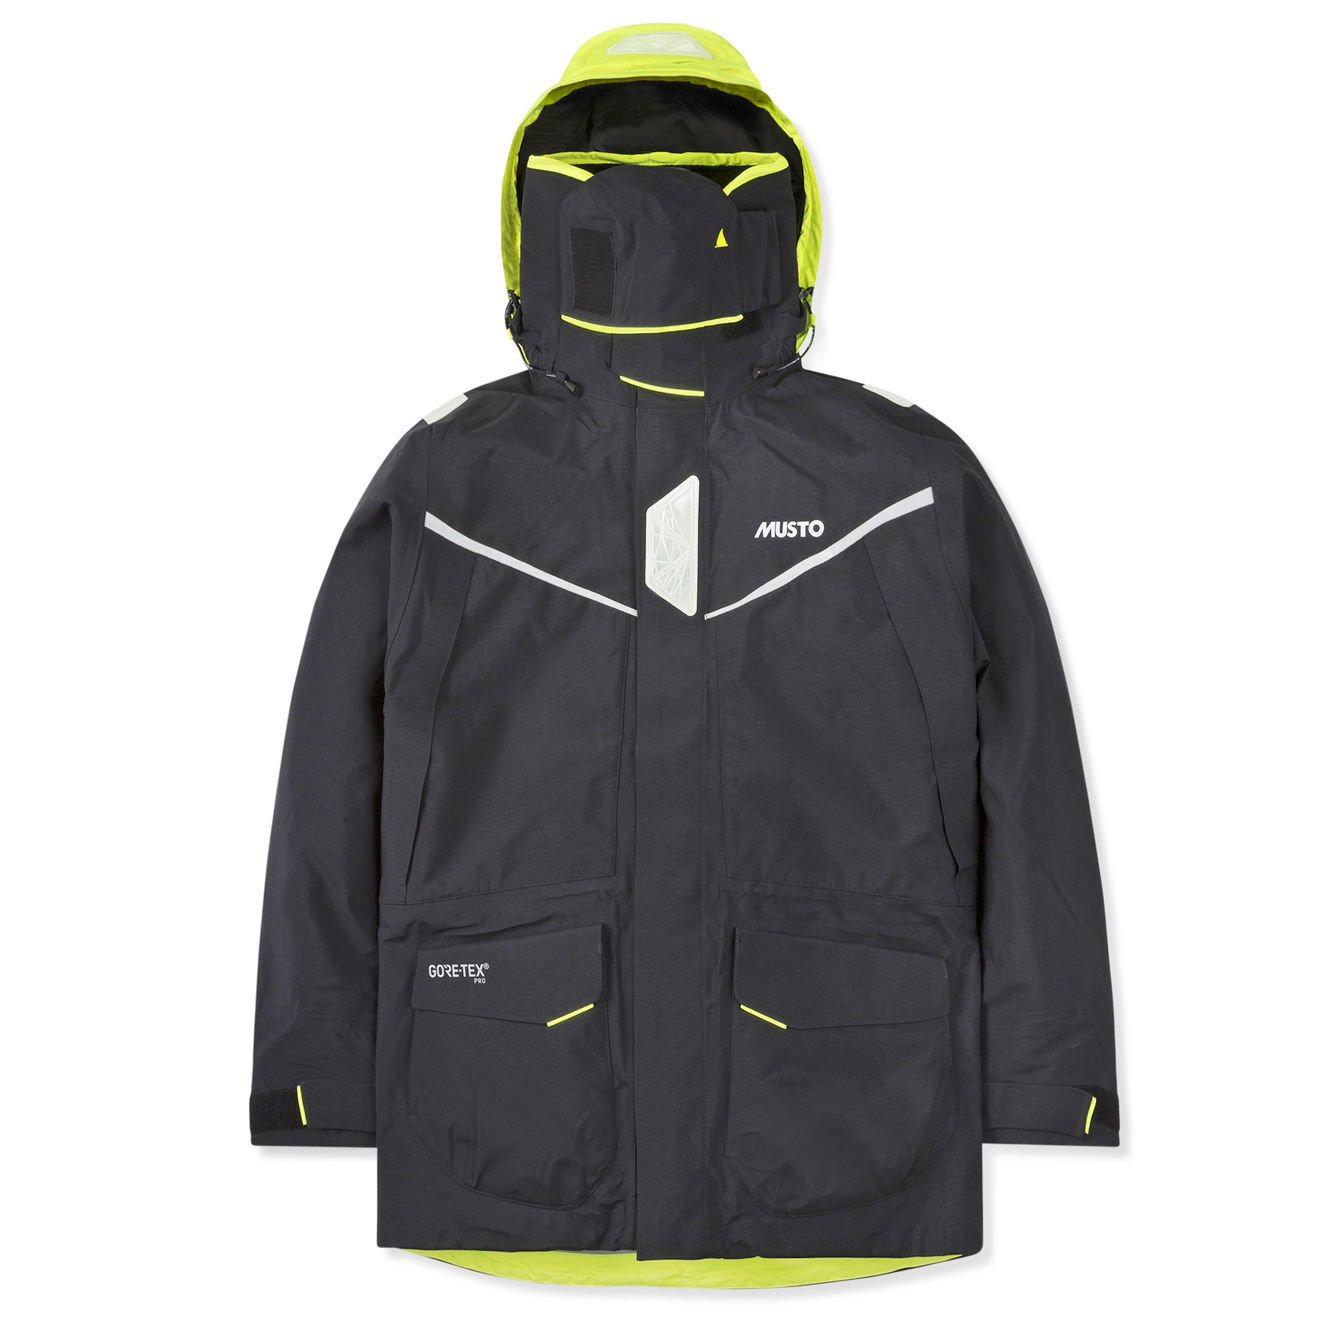 Jacket Musto MPX Gore-Tex Pro Offshore Jacket Black MB